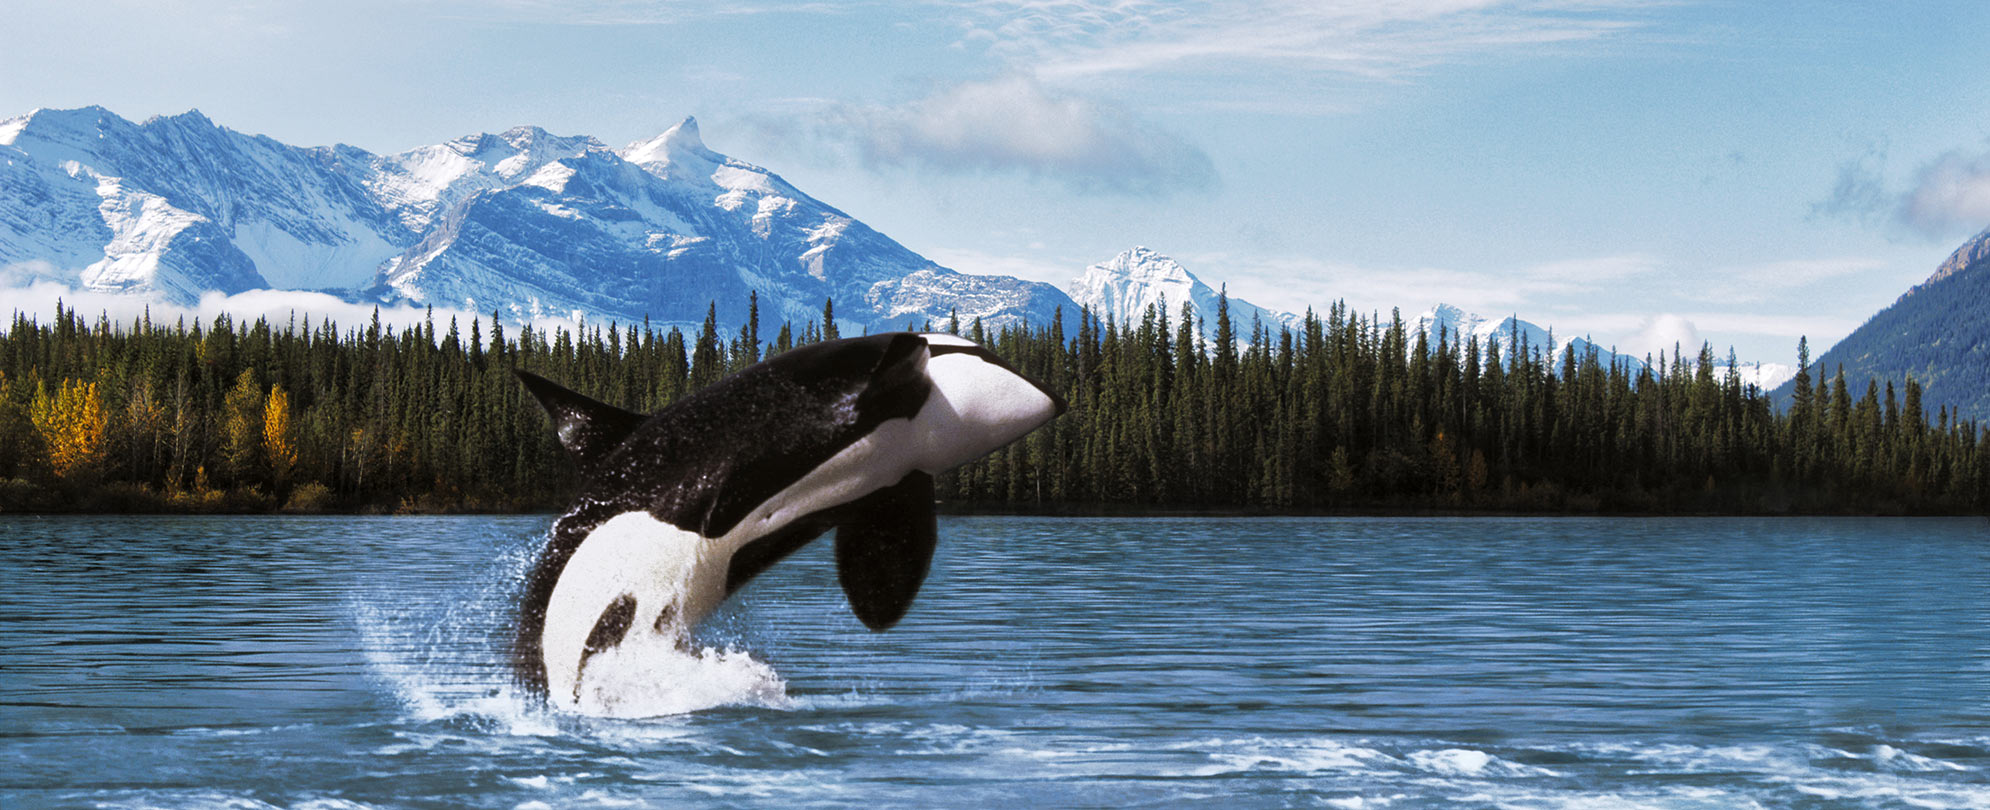 A killer whale jumping out of the water in Alaska, snow covered mountains and pine trees in the distance.